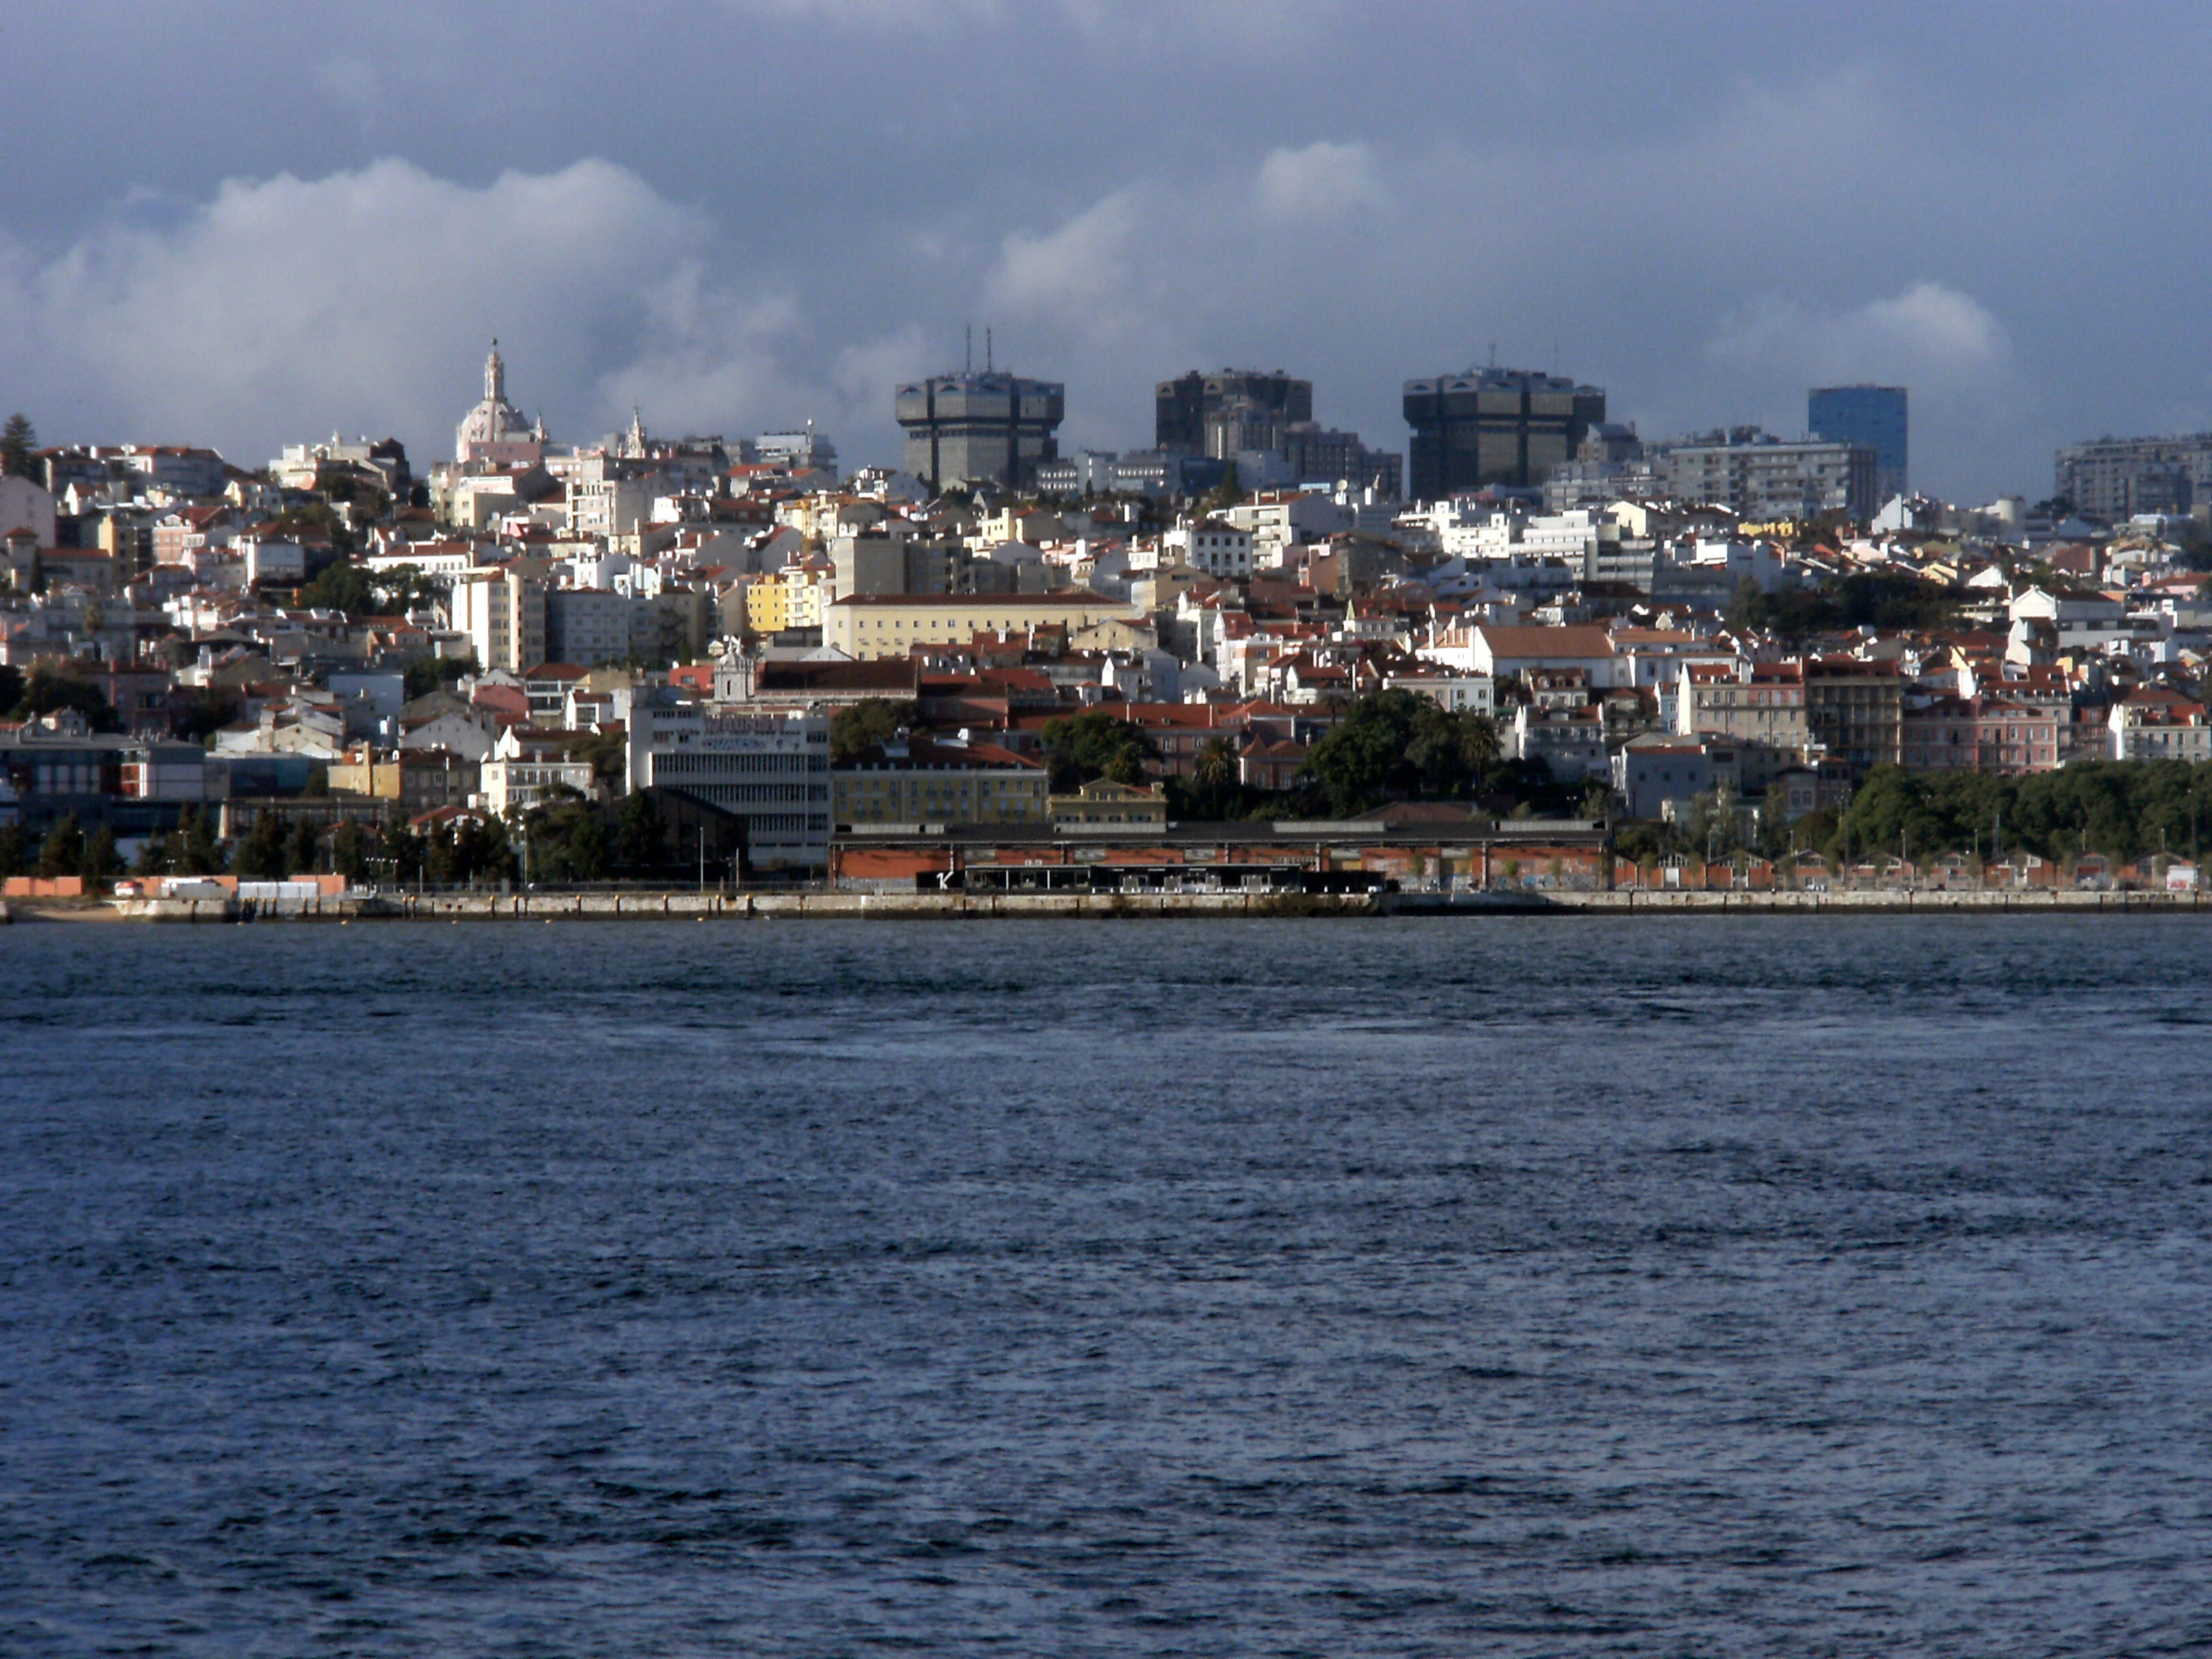 Almada’s Less Carbon Climate Fund becomes revolving